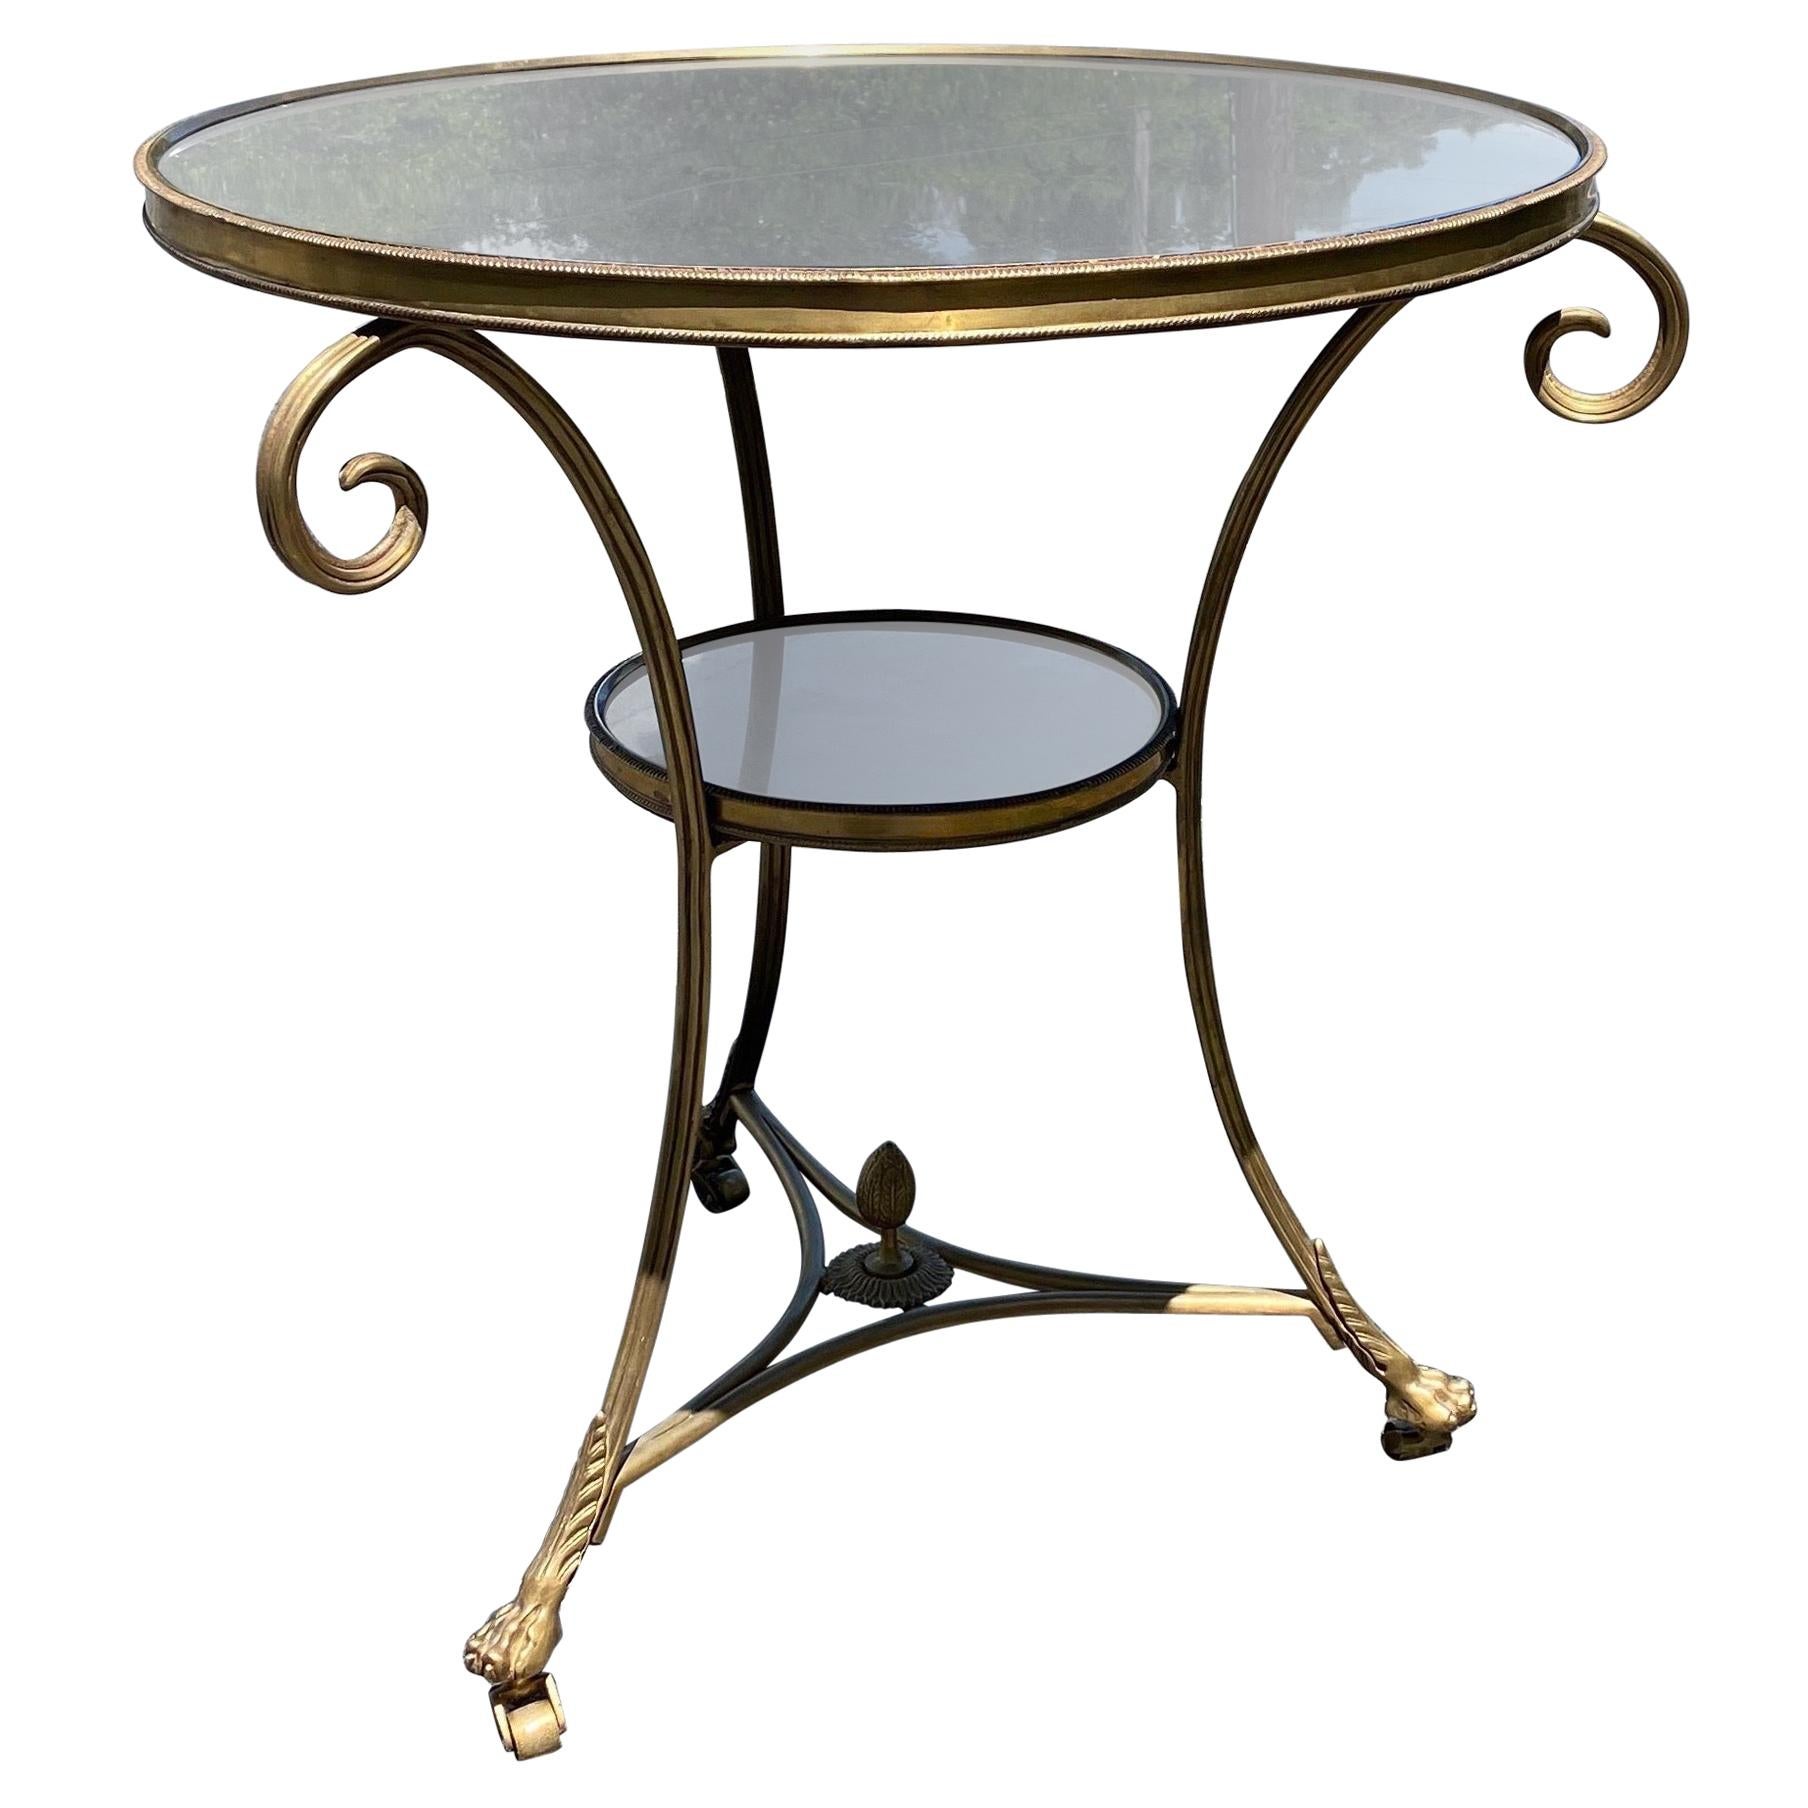 Late 19th-Early 20th Century Directoire Style Bronze Gueridon For Sale